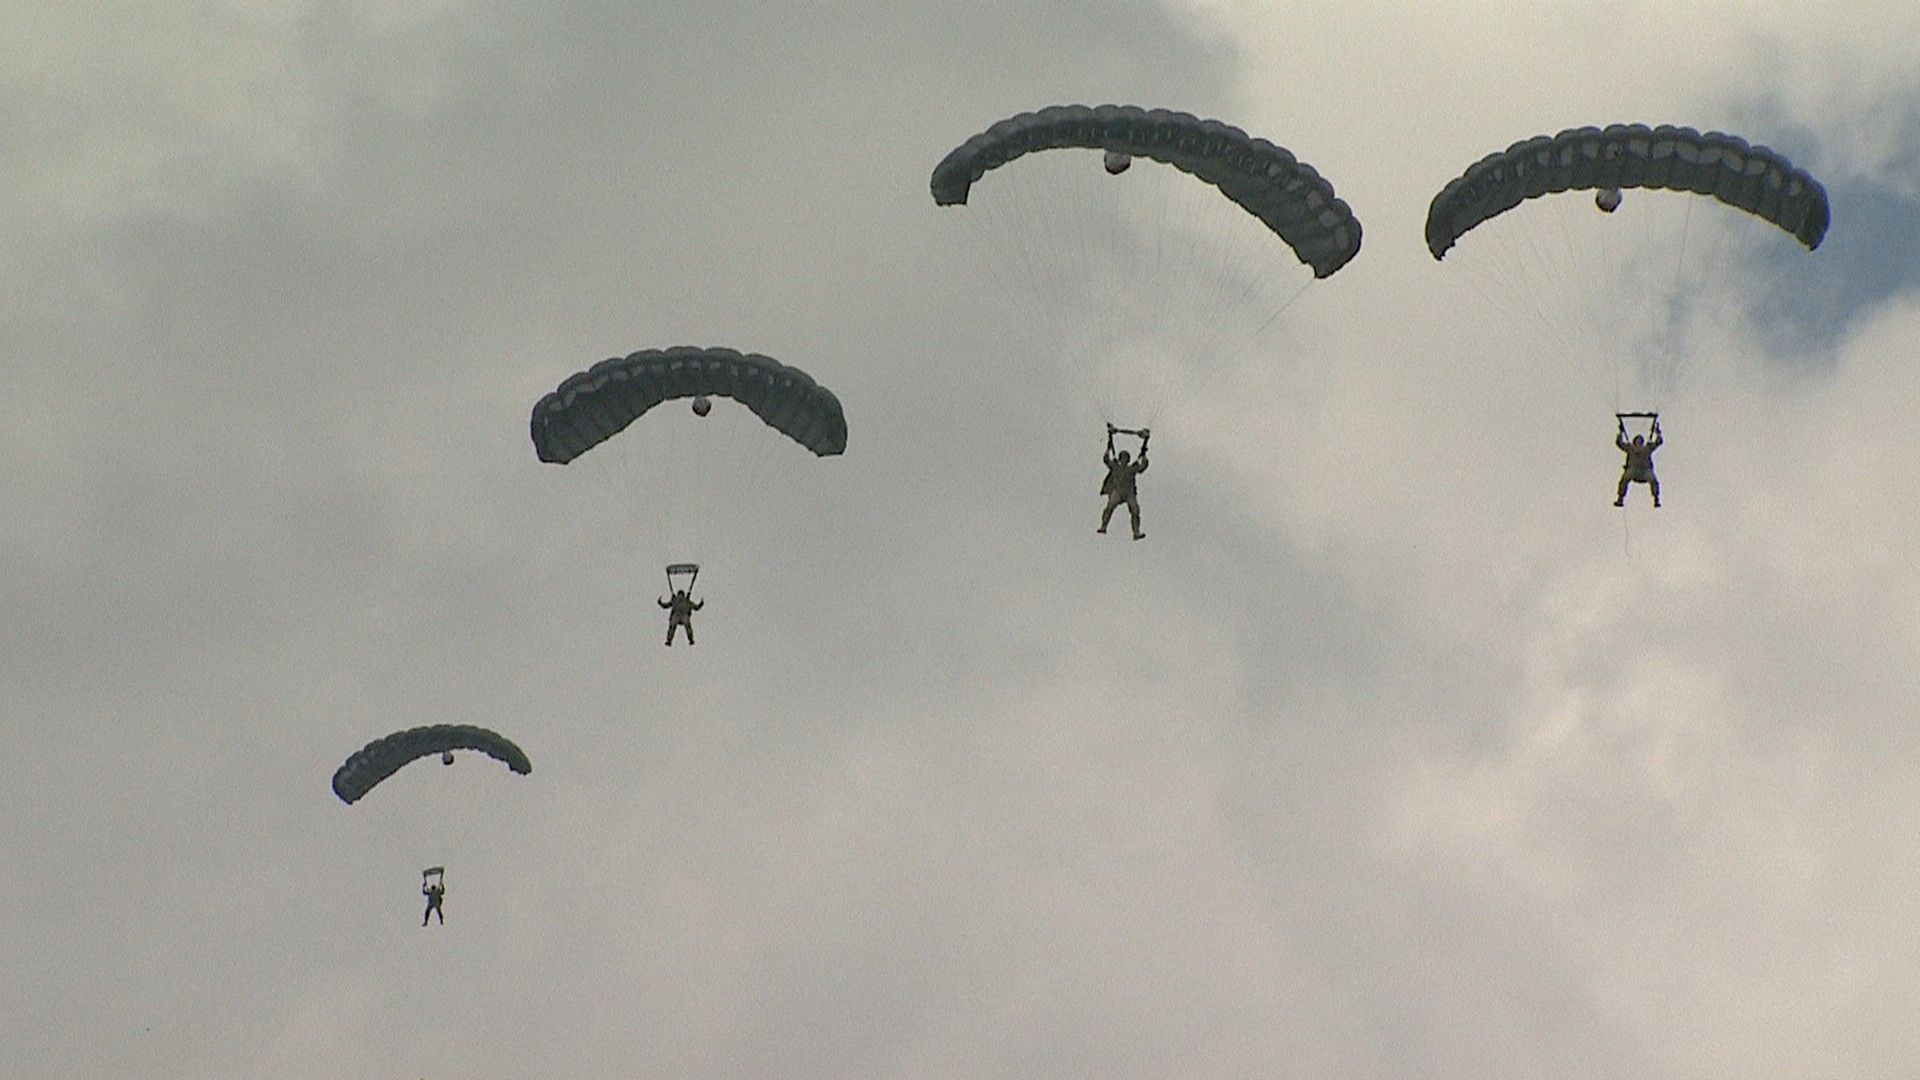 Airborne Special Forces test new Parachute Navigation System at Ft. Bragg. Article. The United States Army